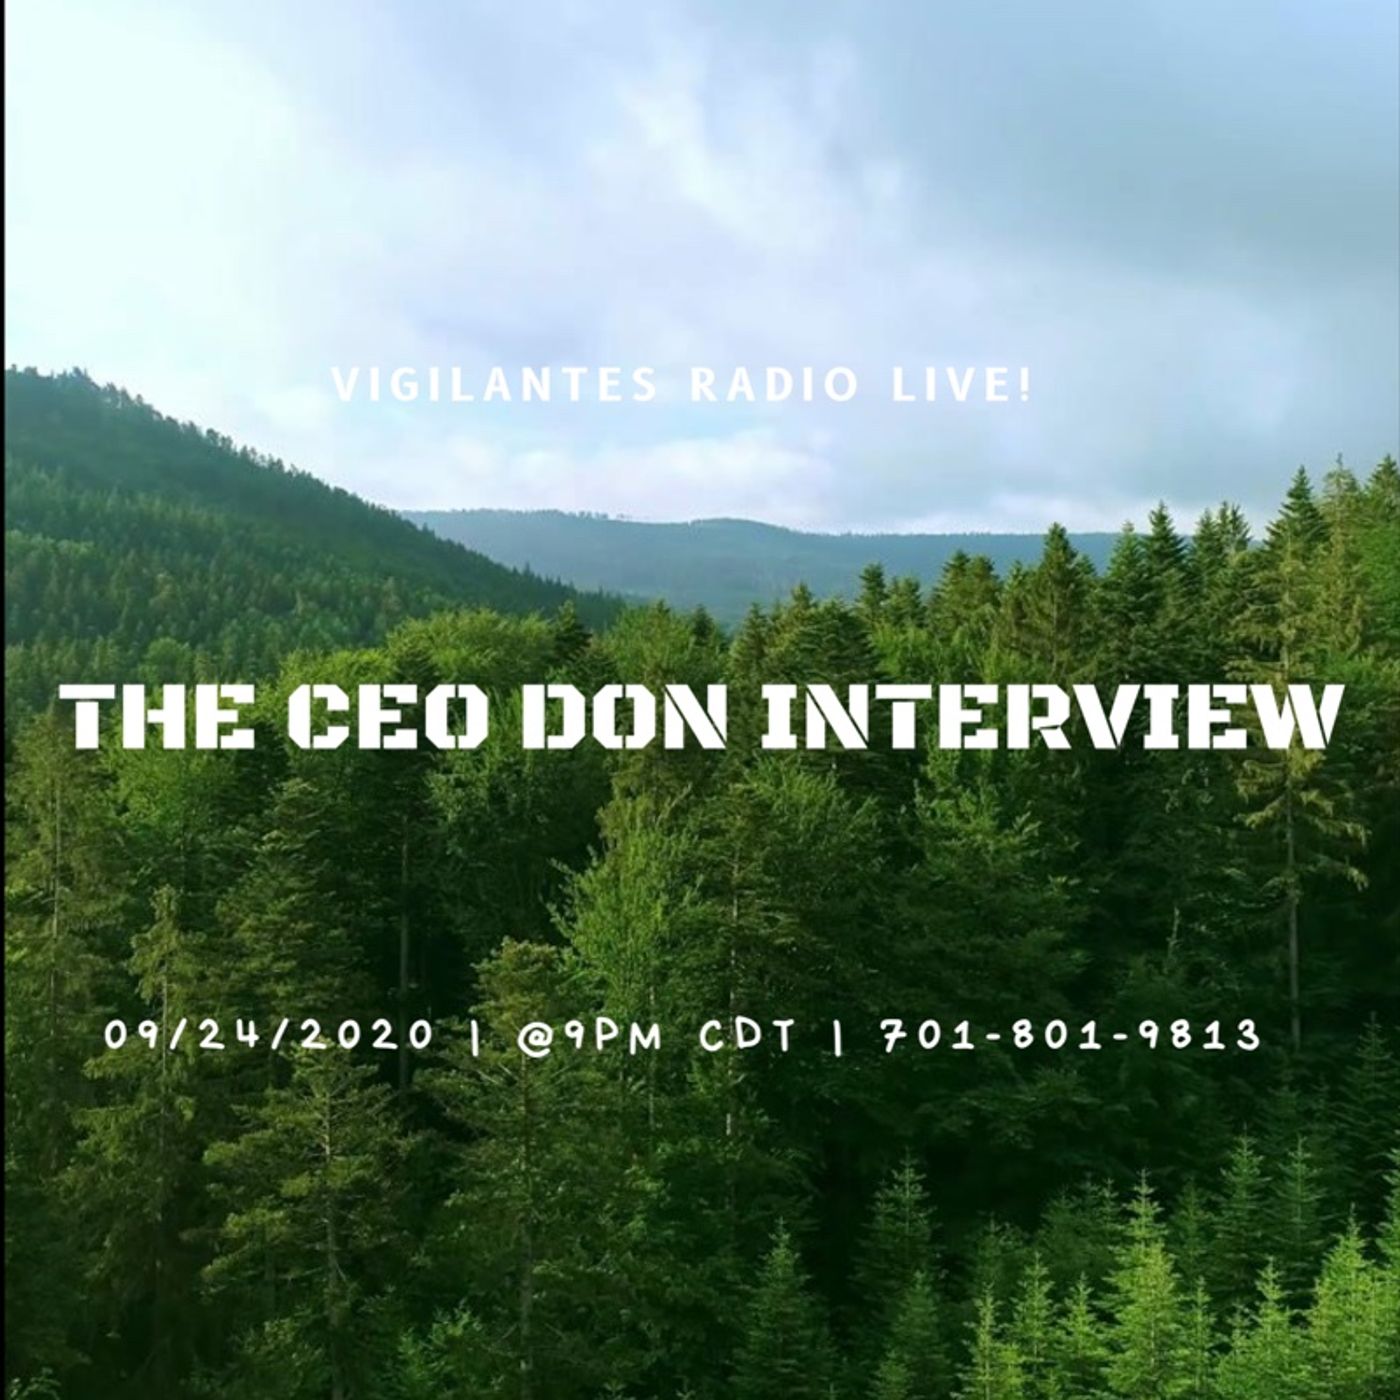 The CEO Don Interview. Image